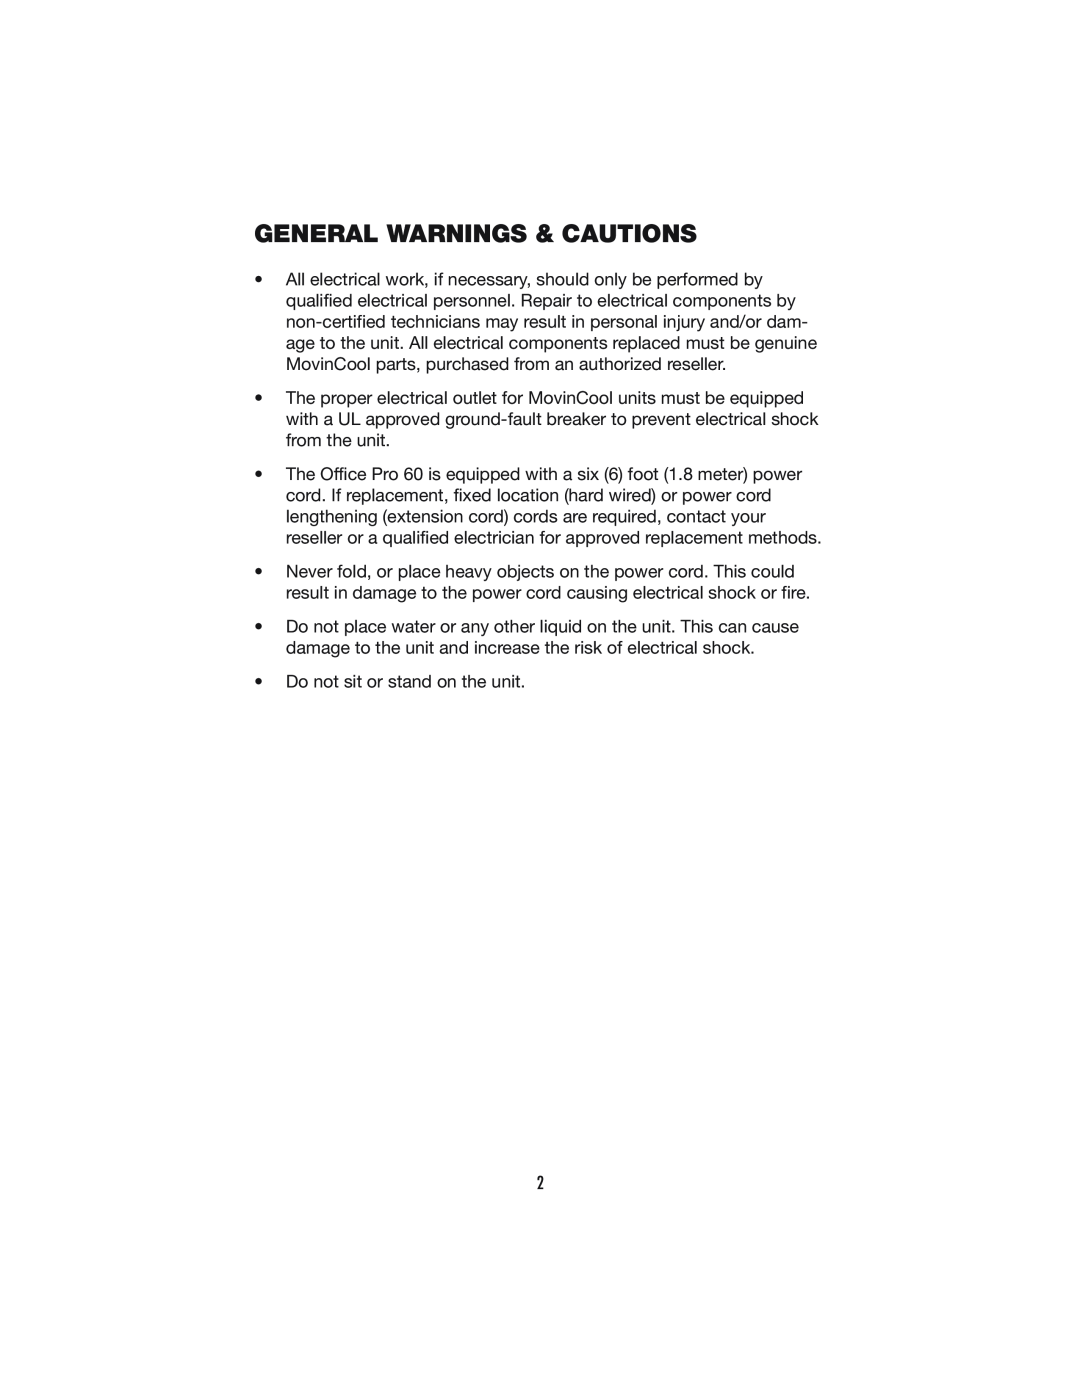 Denso PRO 60 operation manual General Warnings & Cautions 